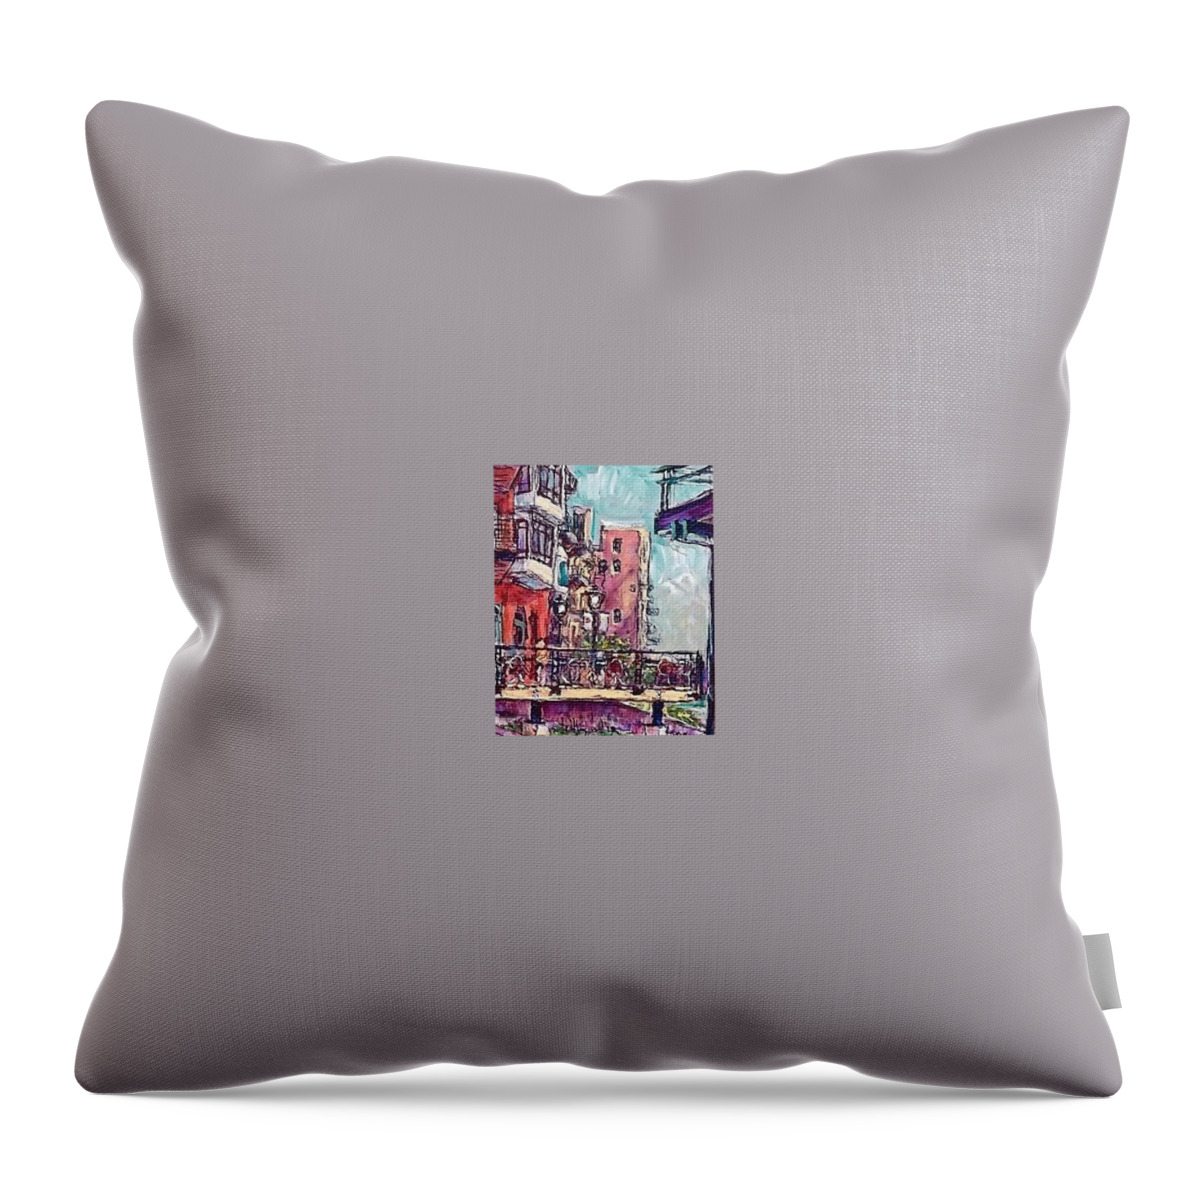 Painting Throw Pillow featuring the painting The Blue Bat by Les Leffingwell